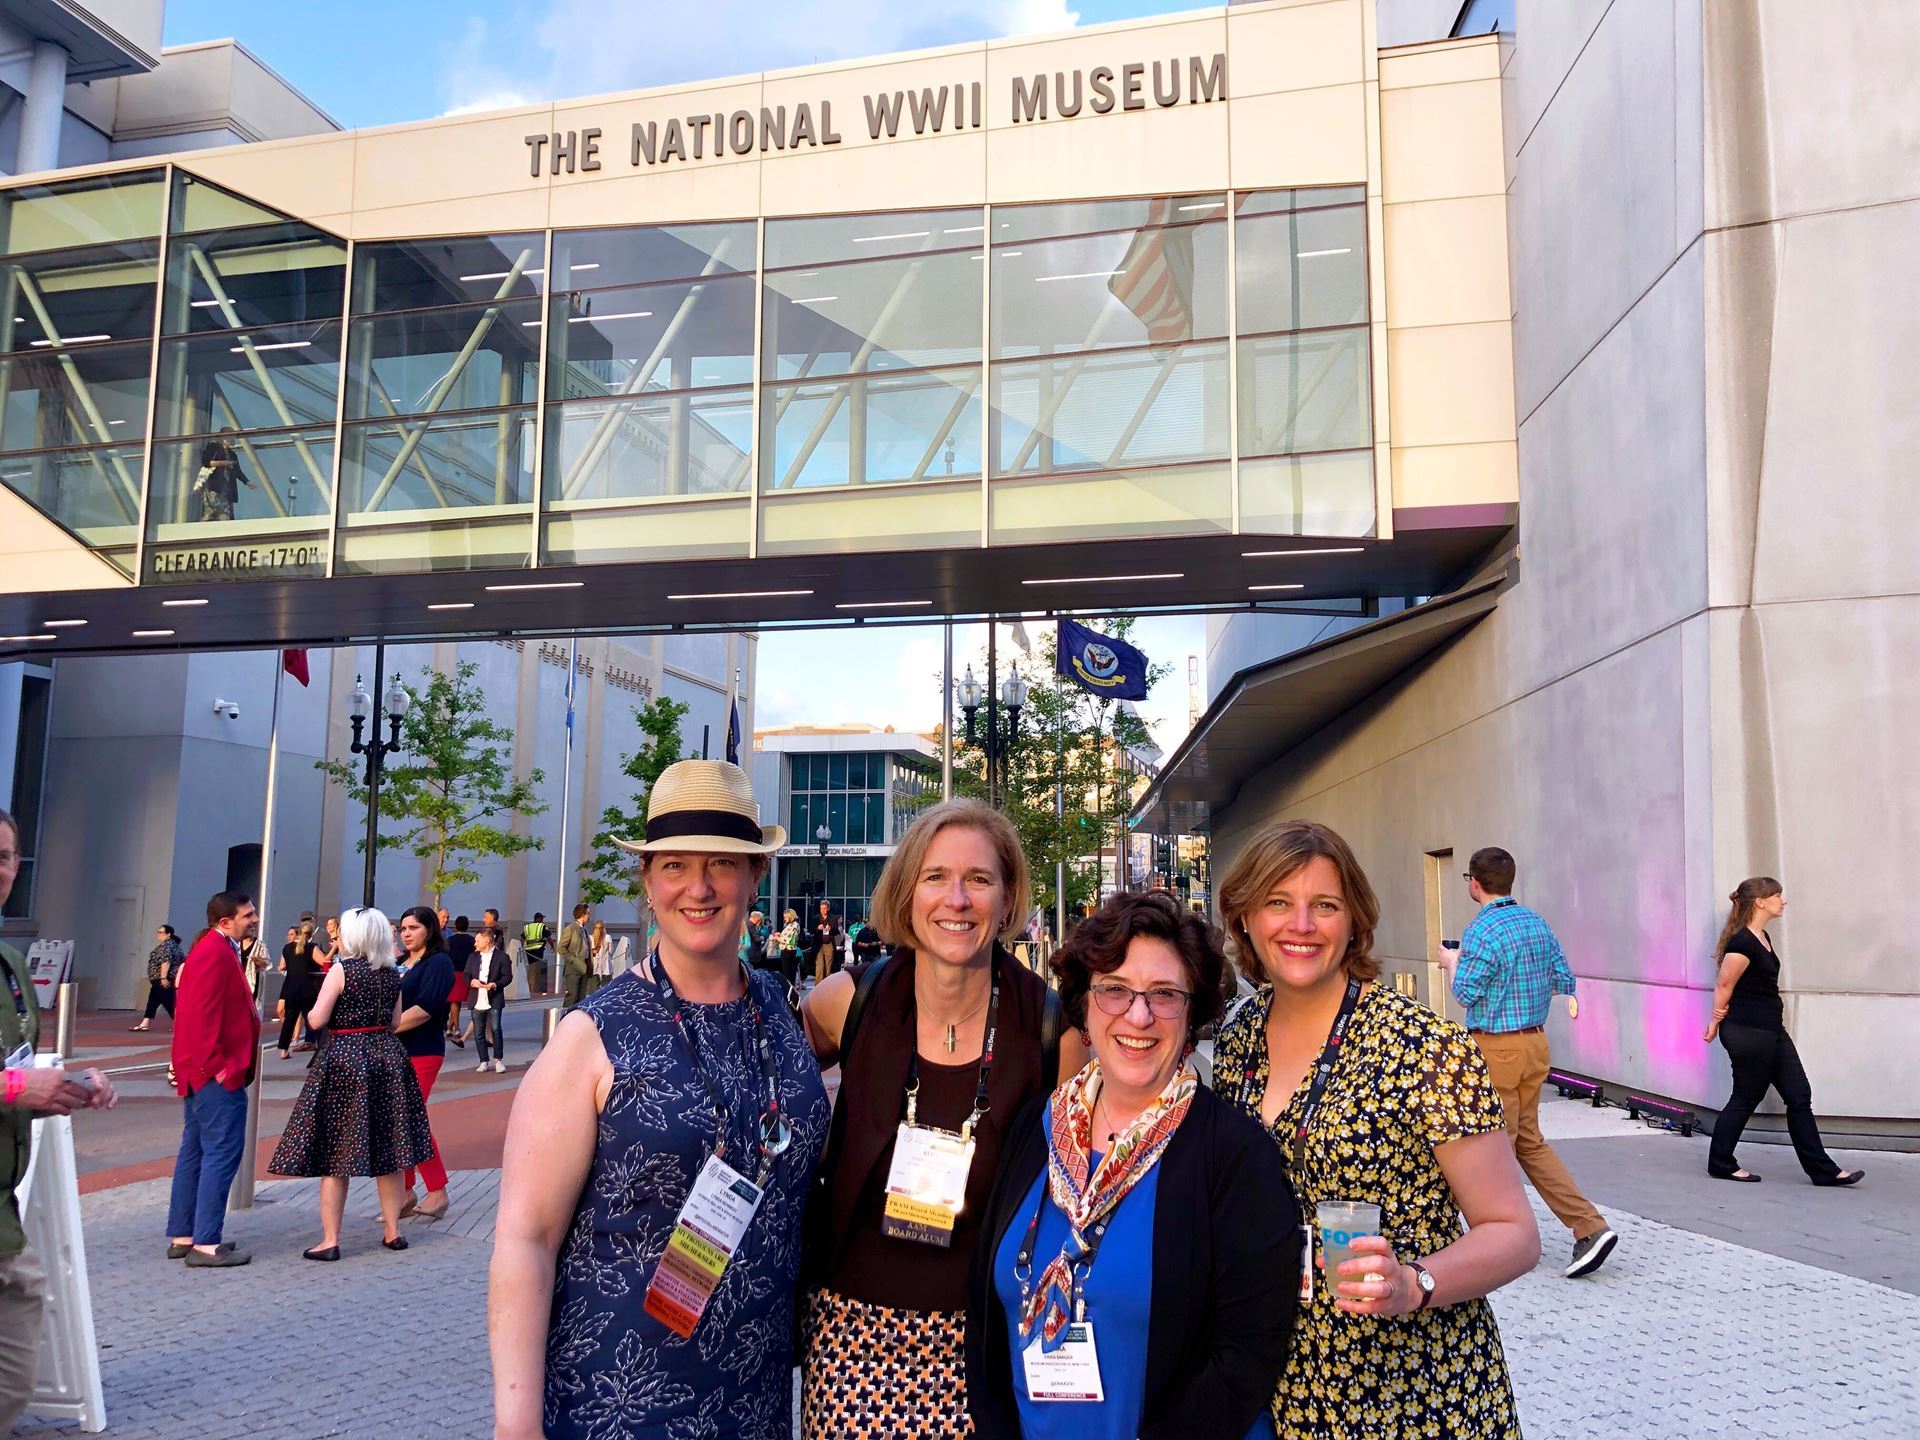 NYS museums meeting up at #AAM2019! Pictured L-R Hillarie Olson (RMSC), Erika Sanger (MANY), Eliza Koslowski (George Eastman Museum), and Lynda Kennedy (The Intrepid Sear, Air & Space Museum) 